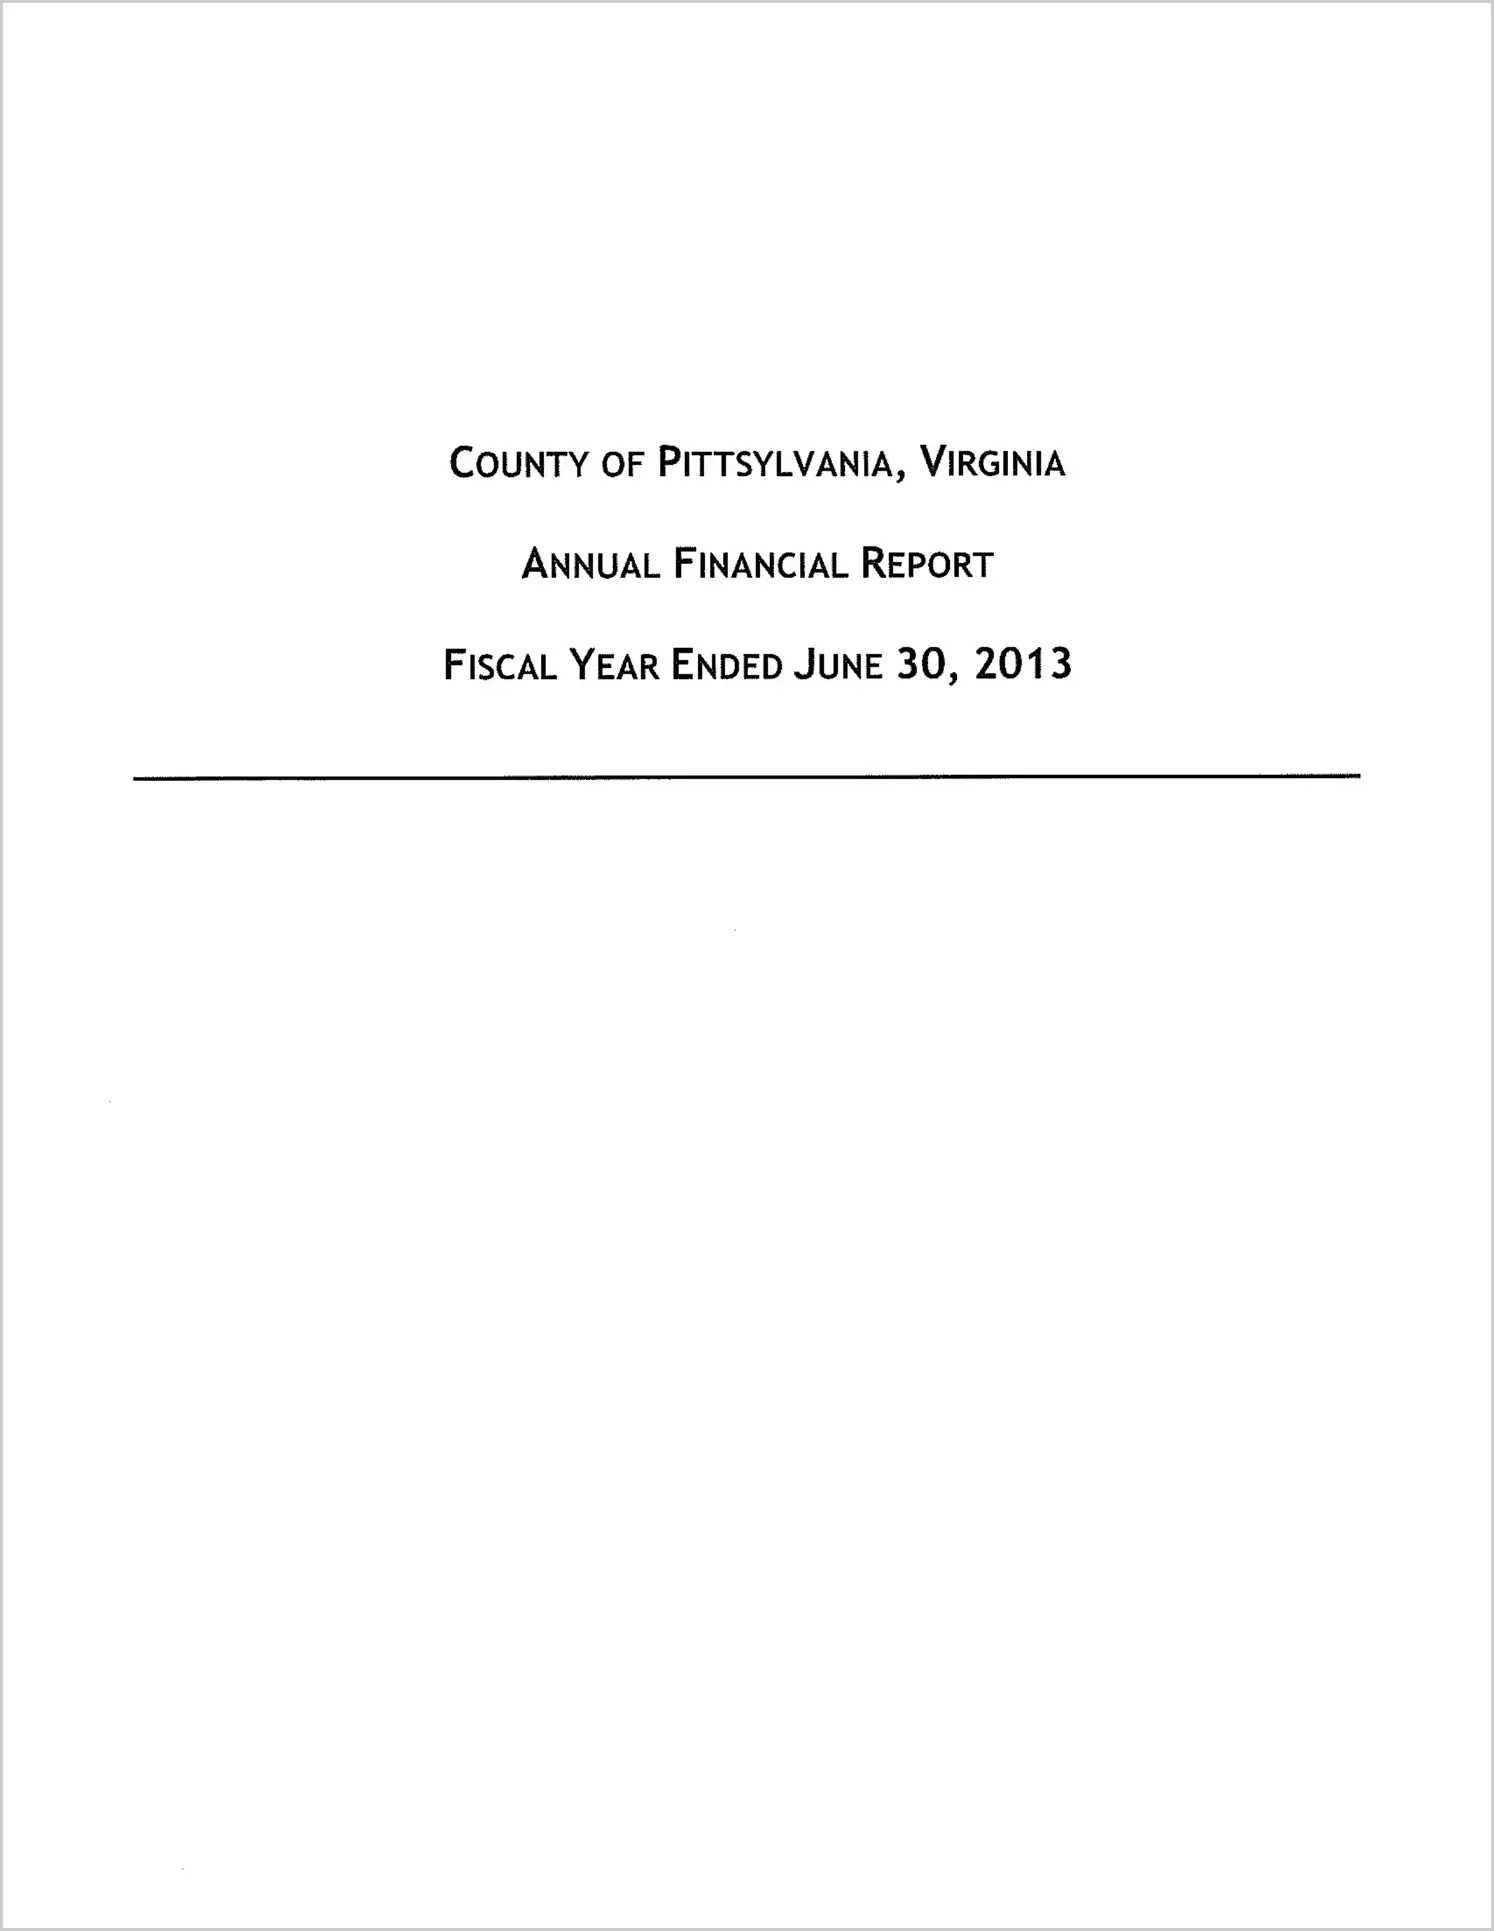 2013 Annual Financial Report for County of Pittsylvania